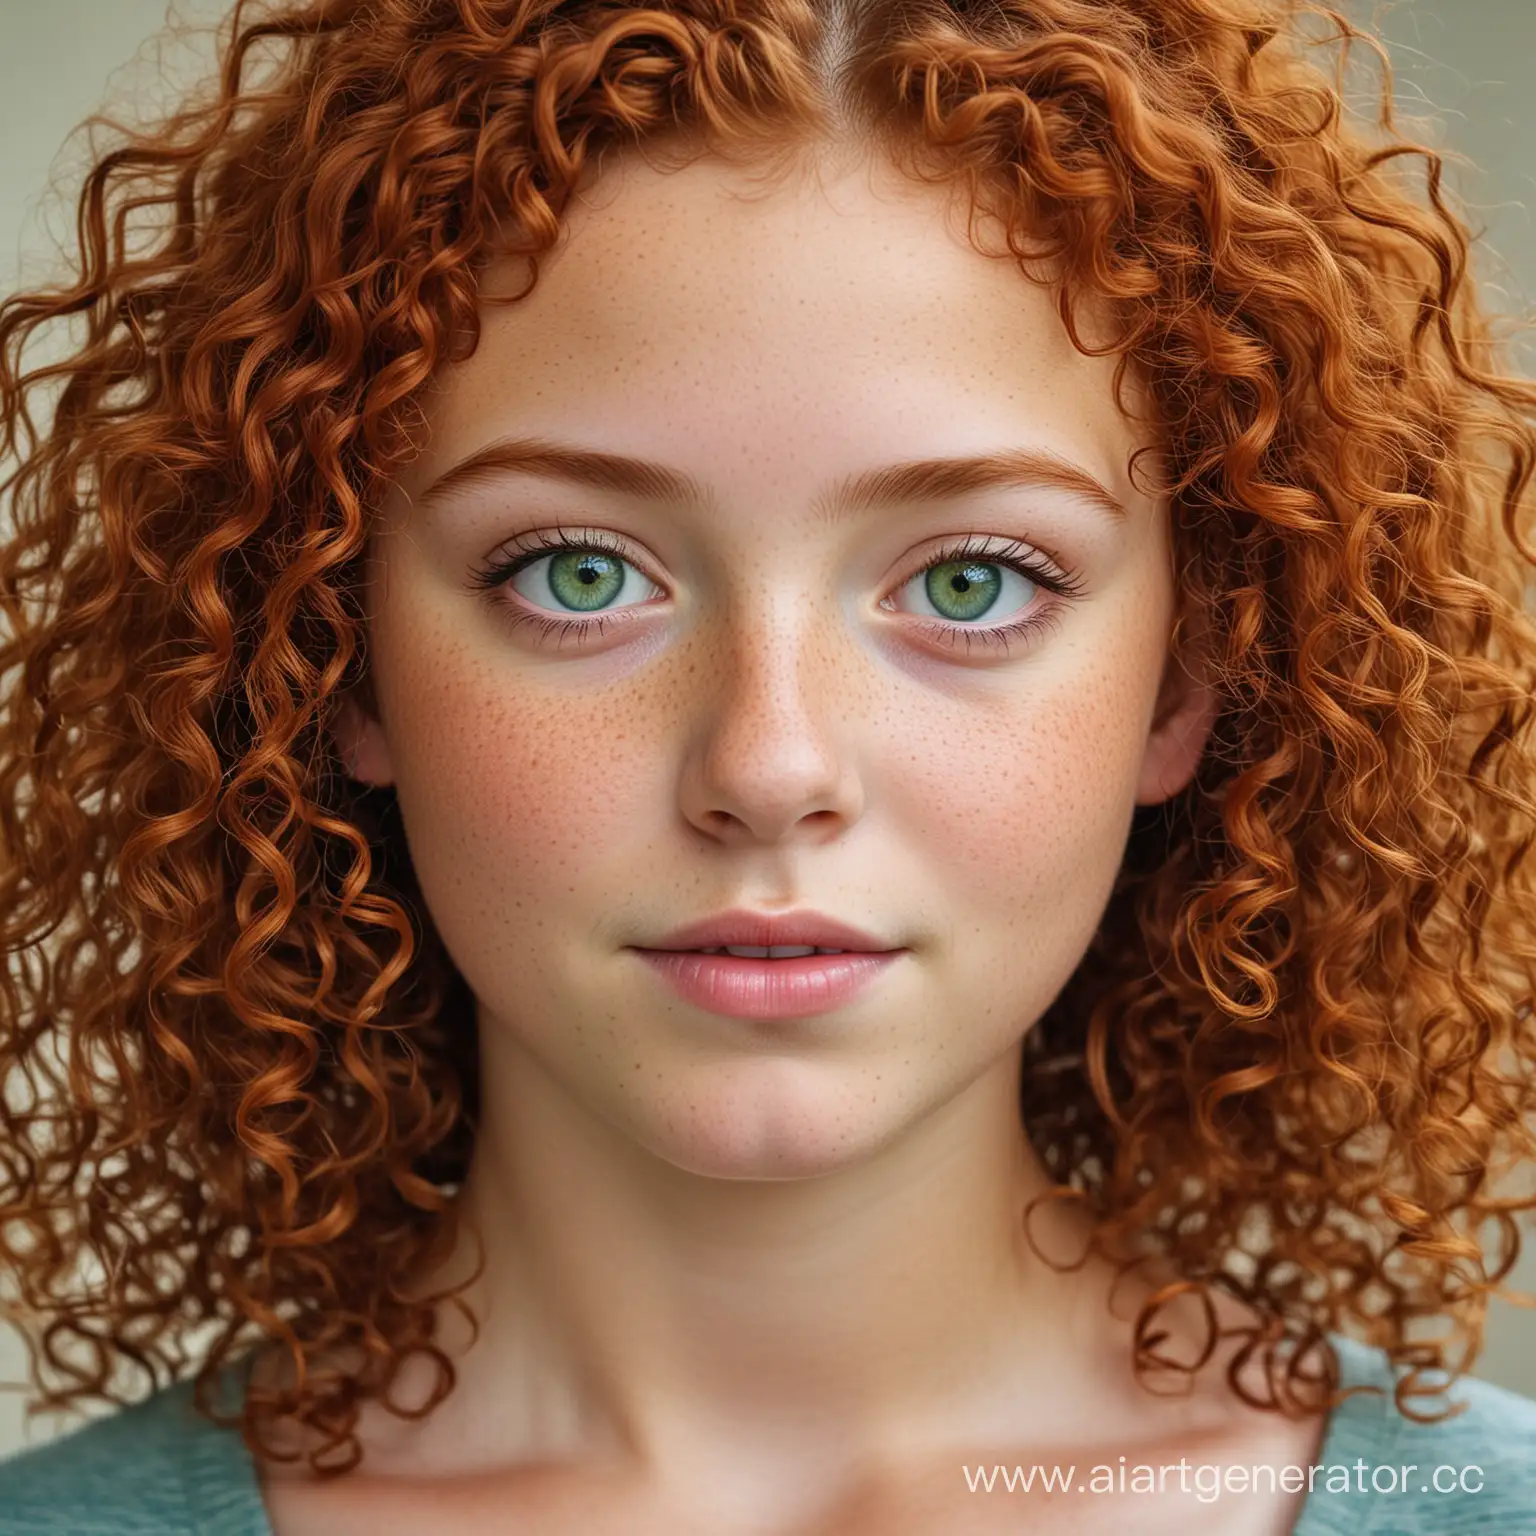 Bright-Curly-RedHaired-Girl-with-Freckles-and-Green-Eyes